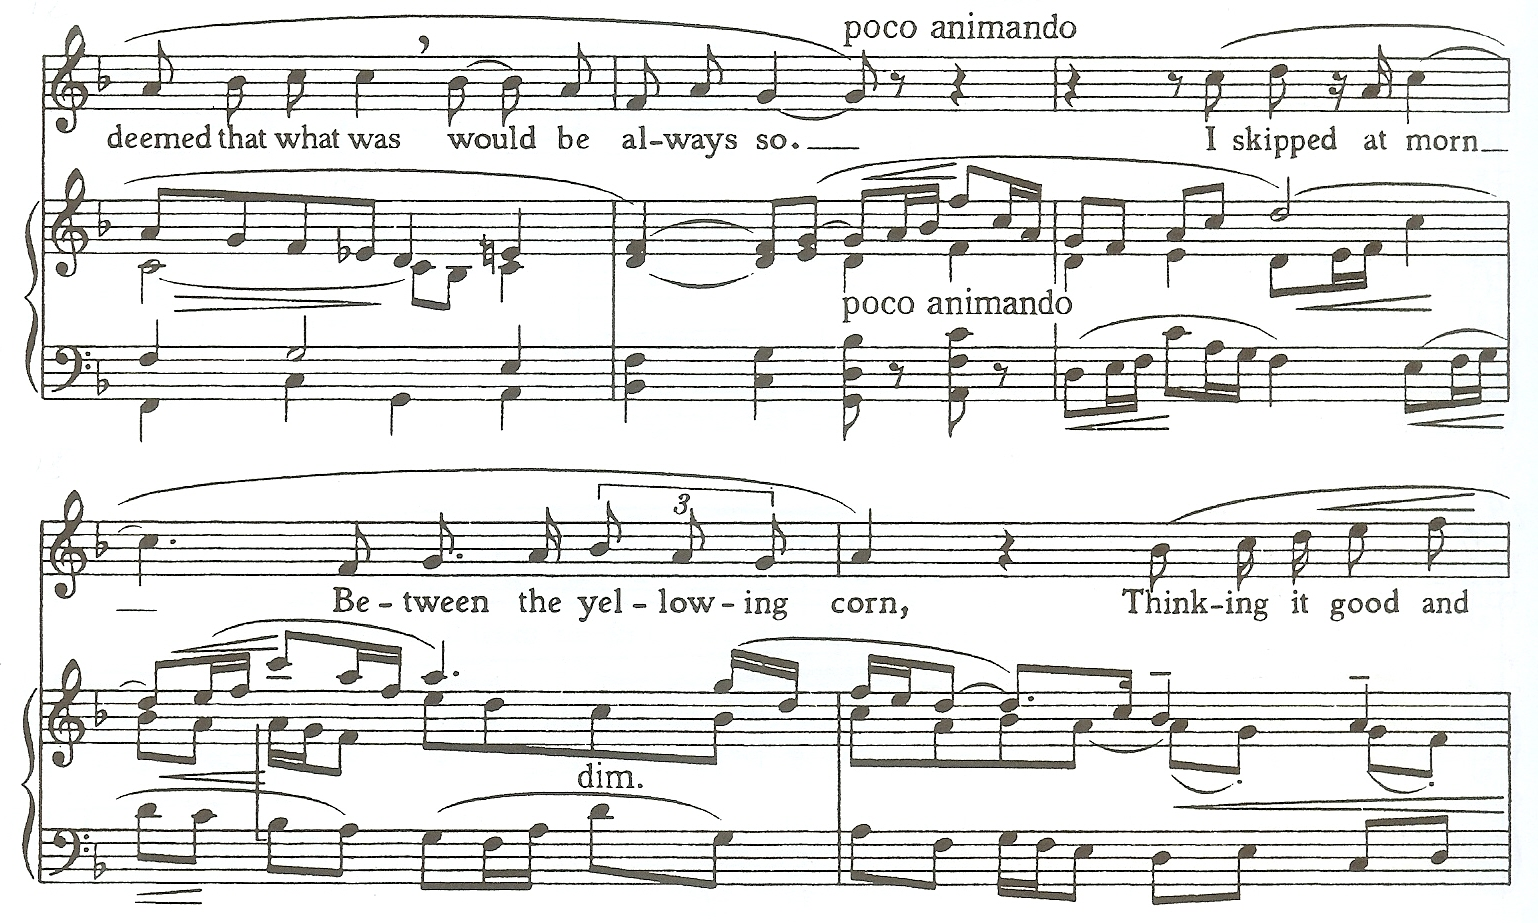 Example 23. The Dance Continued, measures12-16